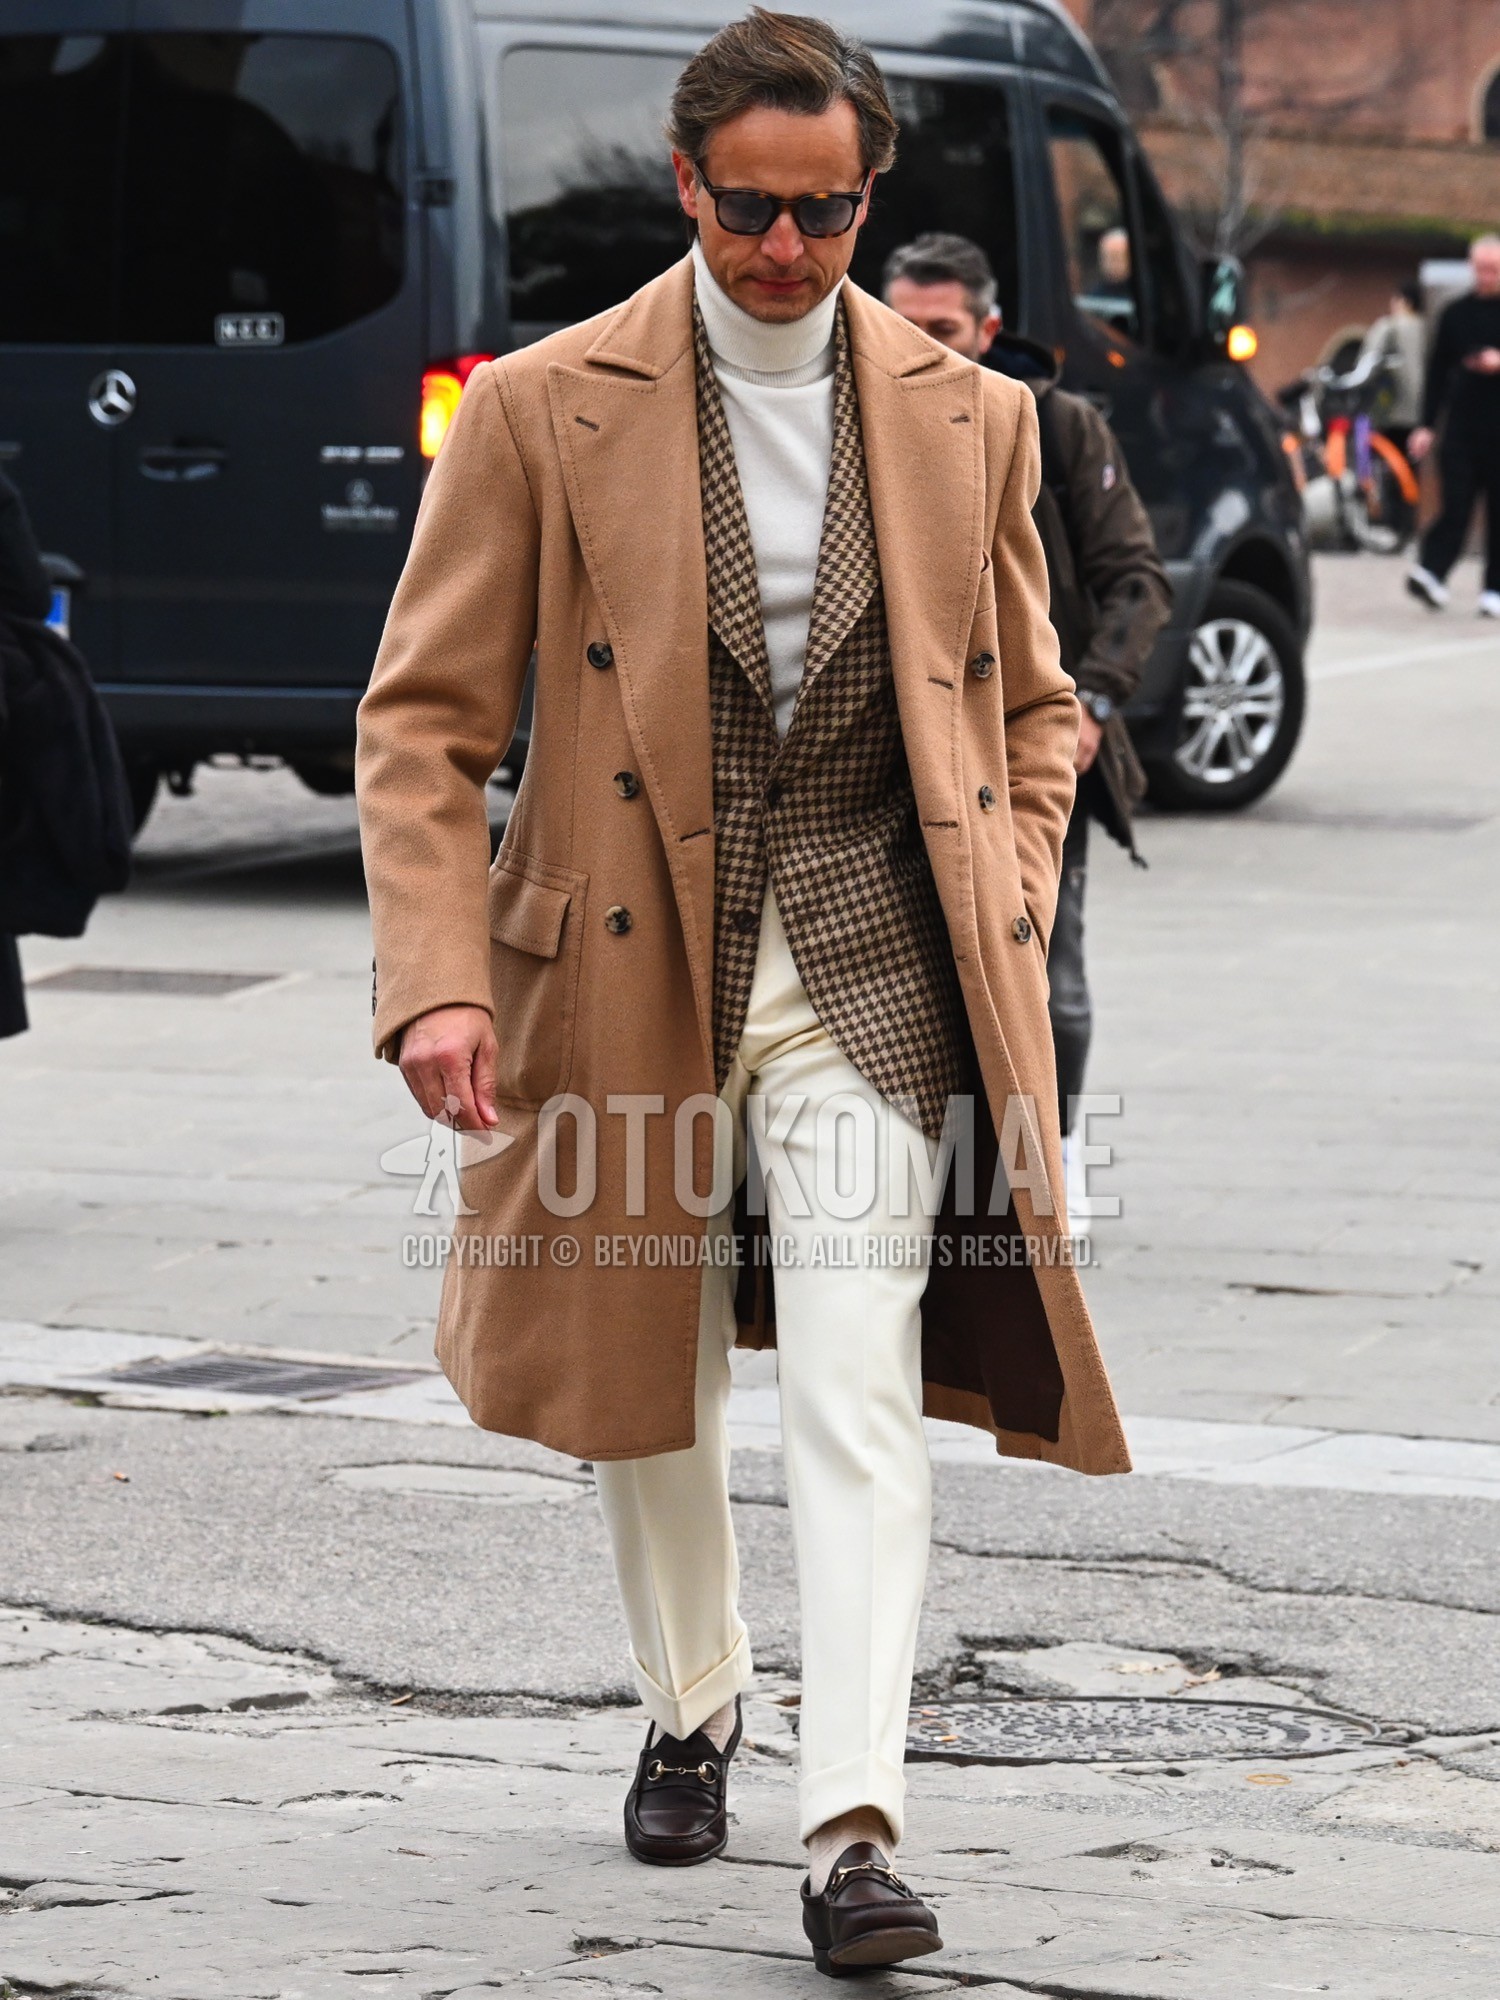 Men's autumn winter outfit with brown tortoiseshell sunglasses, blue plain chester coat, brown check tailored jacket, white plain turtleneck knit, white plain slacks, beige plain socks, bit loafers leather shoes.